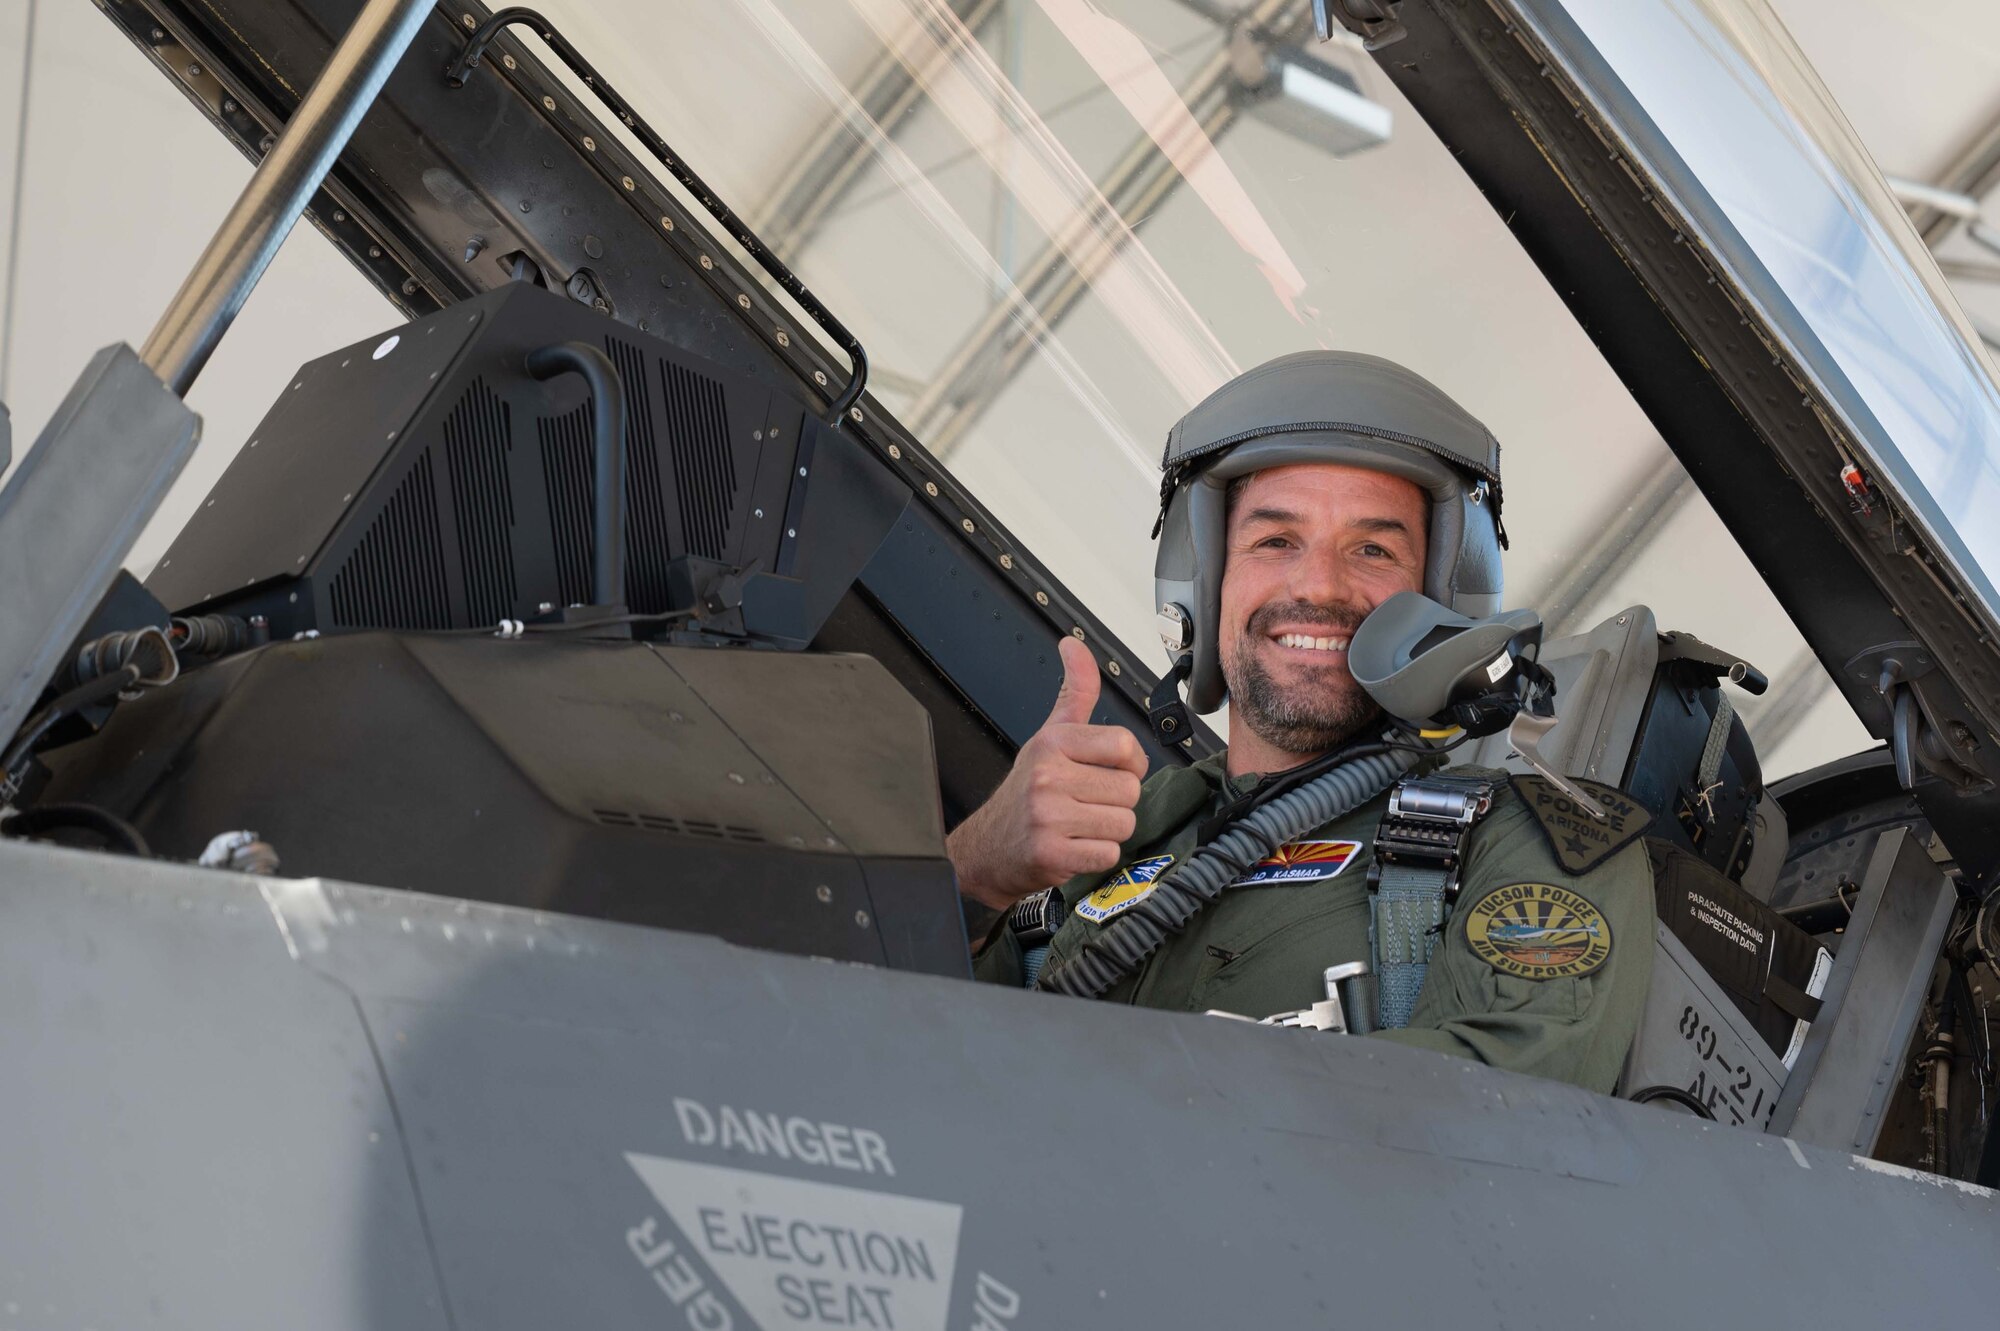 Chad Kasmar, Tucson Police Department Chief of Police, gives a thumbs-up signal before taking flight in an F-16 with Col. Brant Putnam, the 162nd Wing Vice Commander, as his pilot. (U.S. Air Force photo by Maj. Angela Walz)